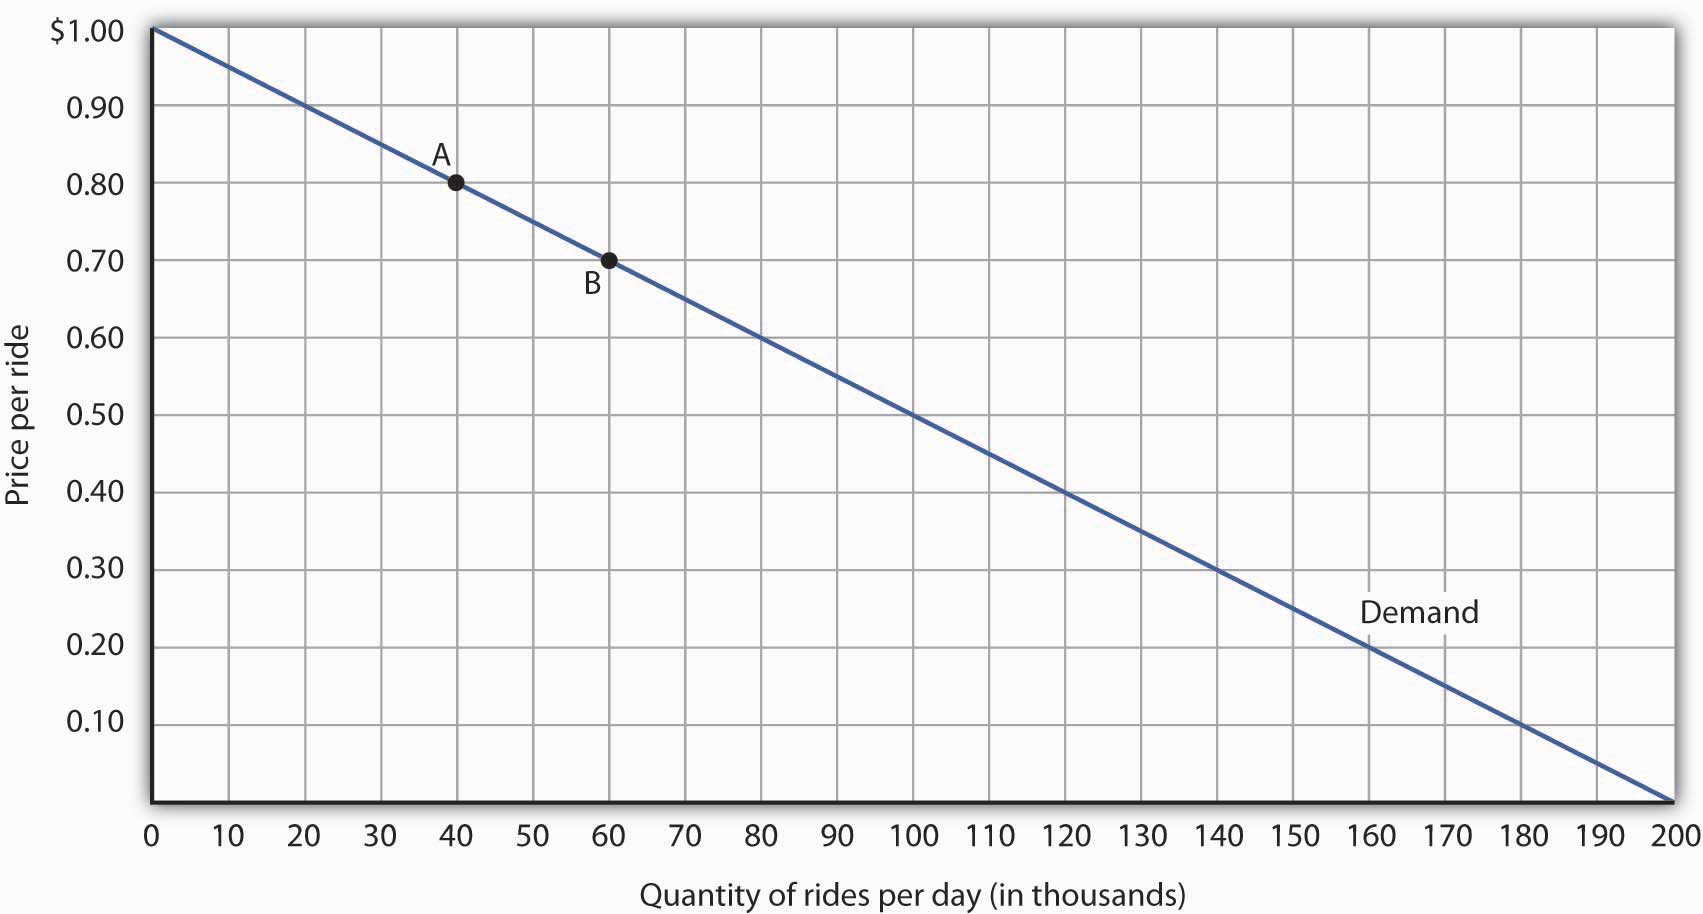 Responsiveness and Demand. The demand curve shows how changes in price lead to changes in quantity demanded. A movement from point A to point B shows that a $0.10 reduction in price increases the number of rides per day by 20,000. A movement from B to A is a $0.10 increase in price, which reduces quantity demanded by 20,000 rides per day.